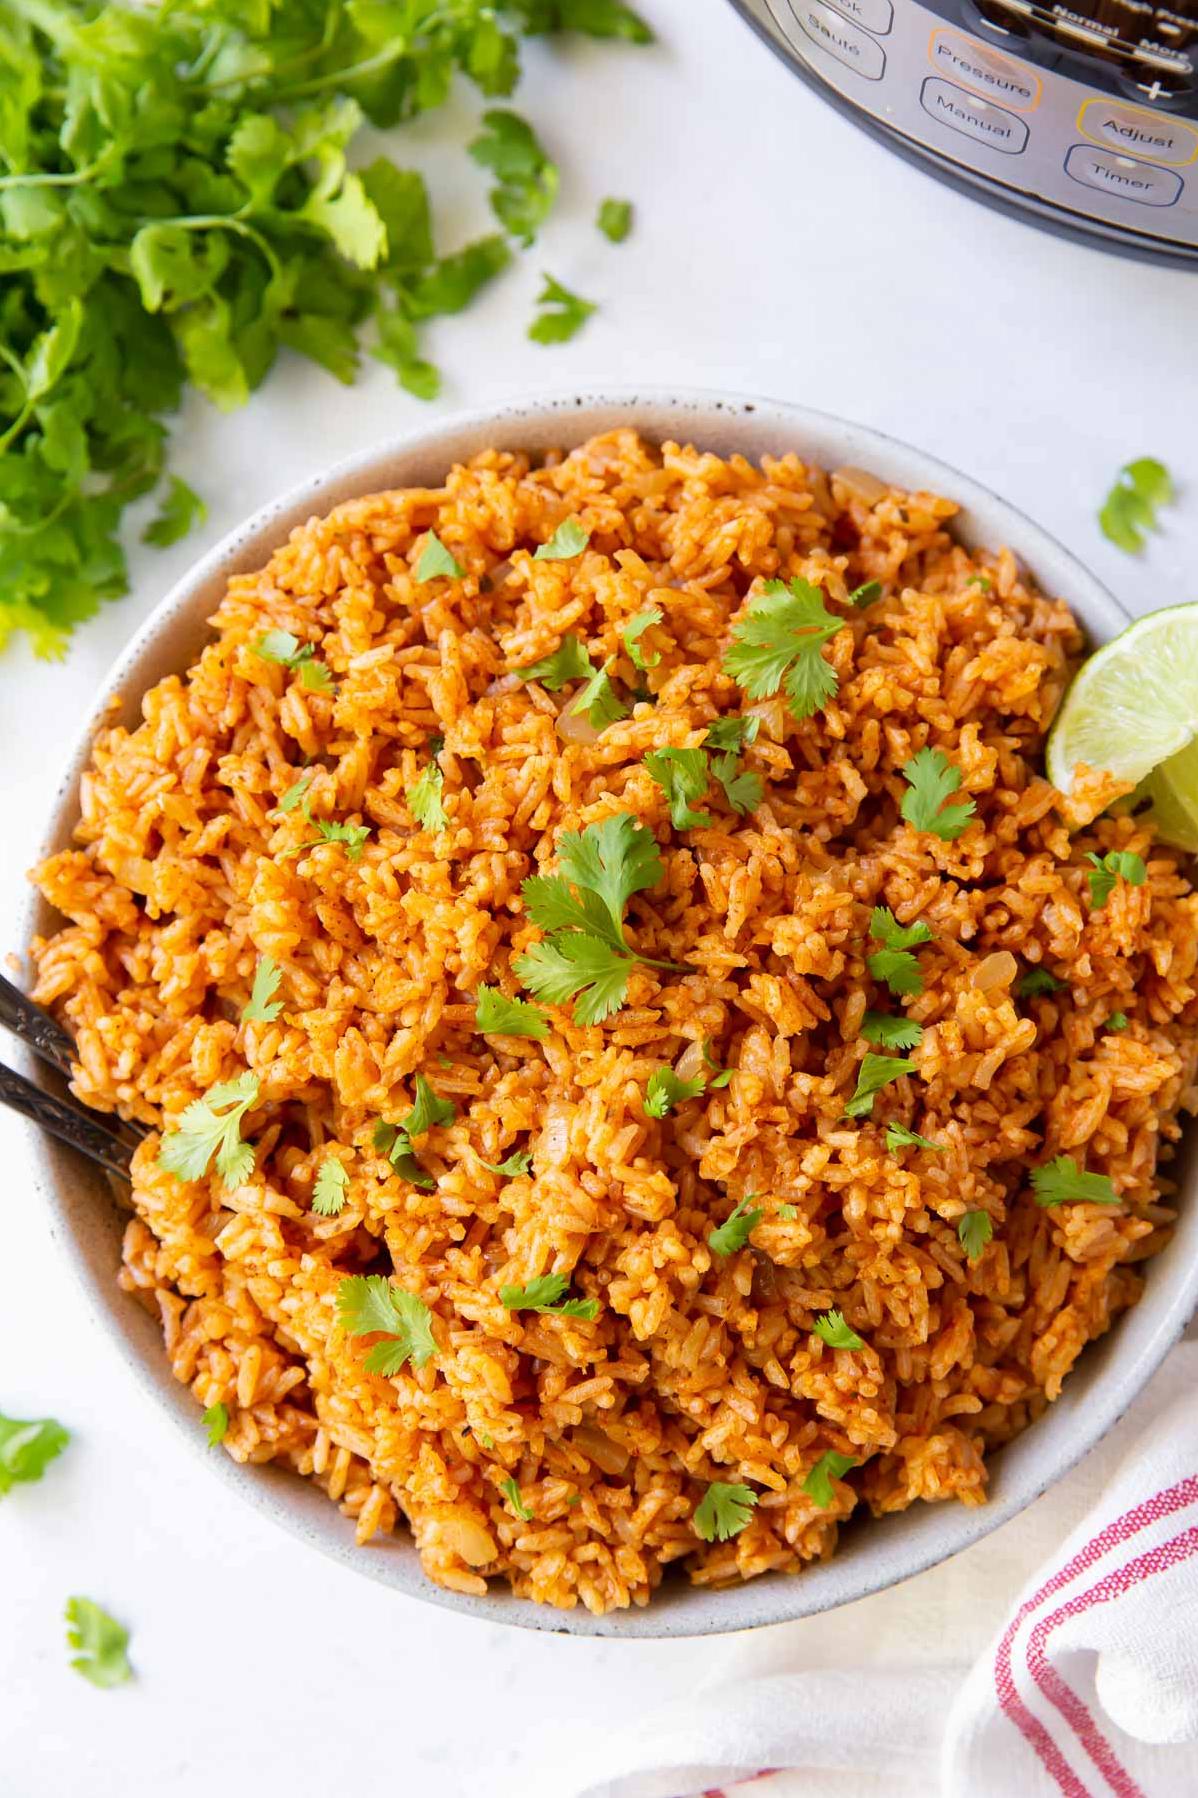  Make a batch of this bold and flavorful rice in just 30 minutes.